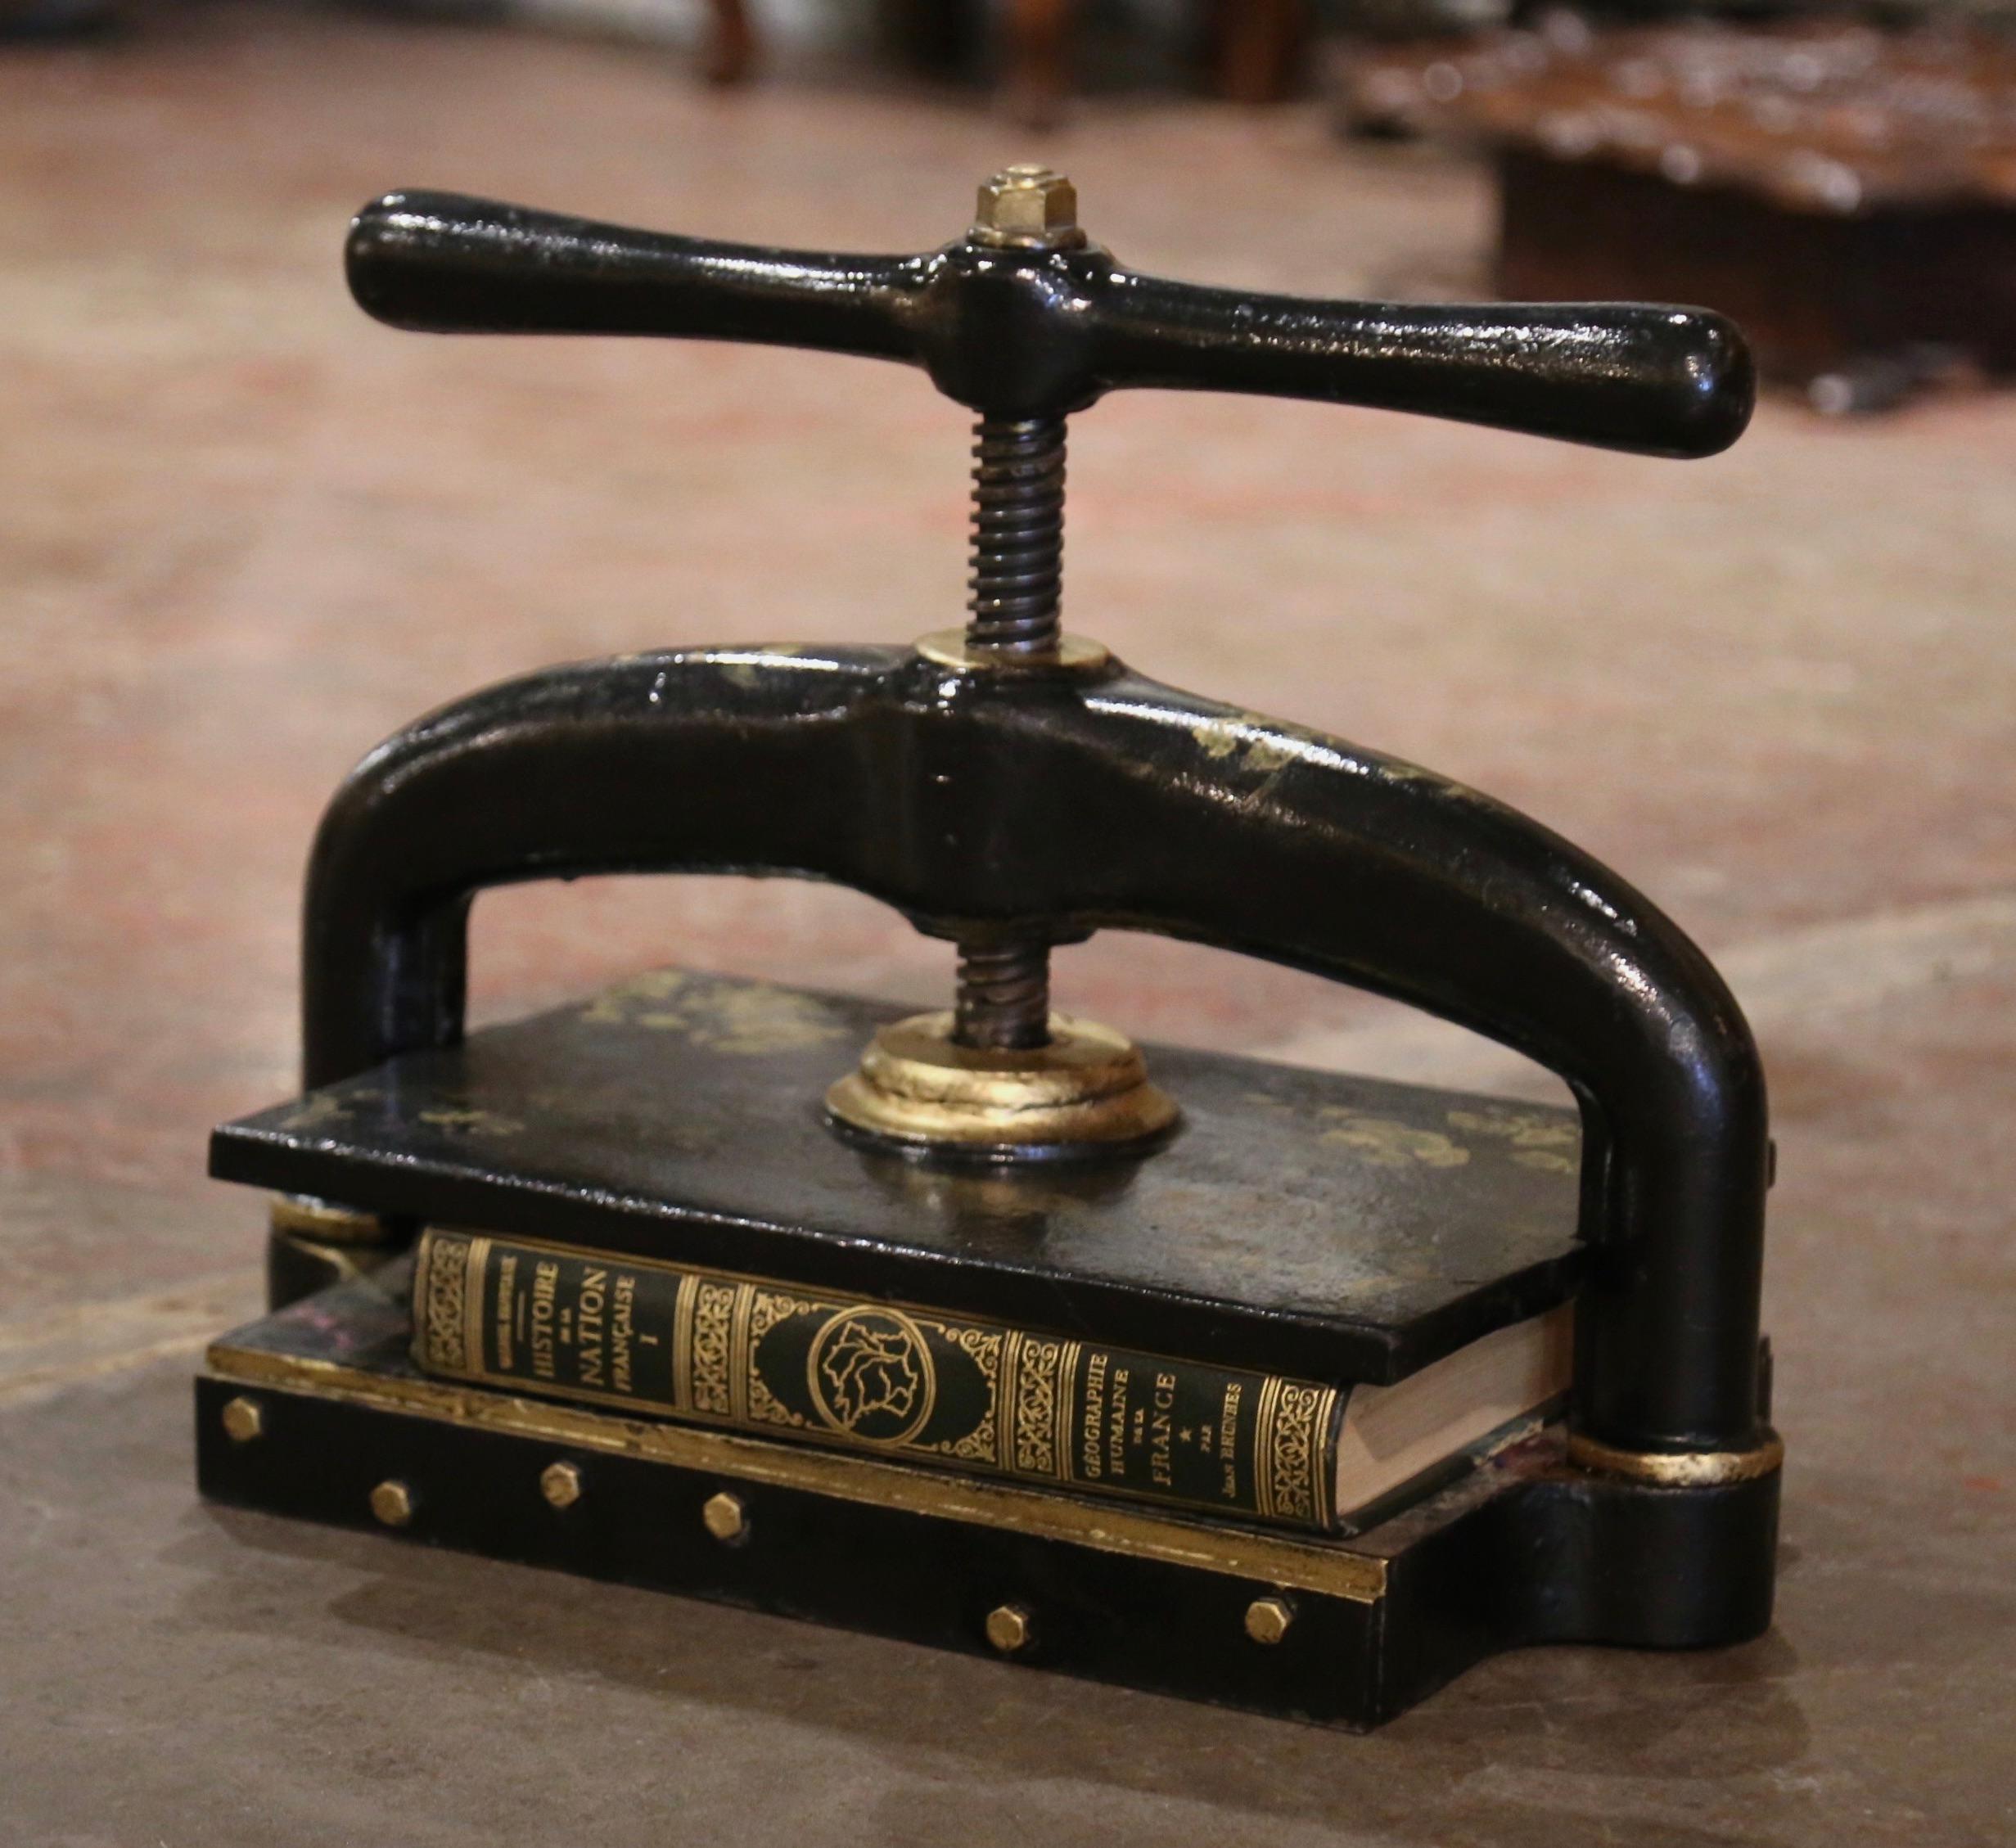 This antique paper binding press was forged in France, circa 1860. The large Classic 